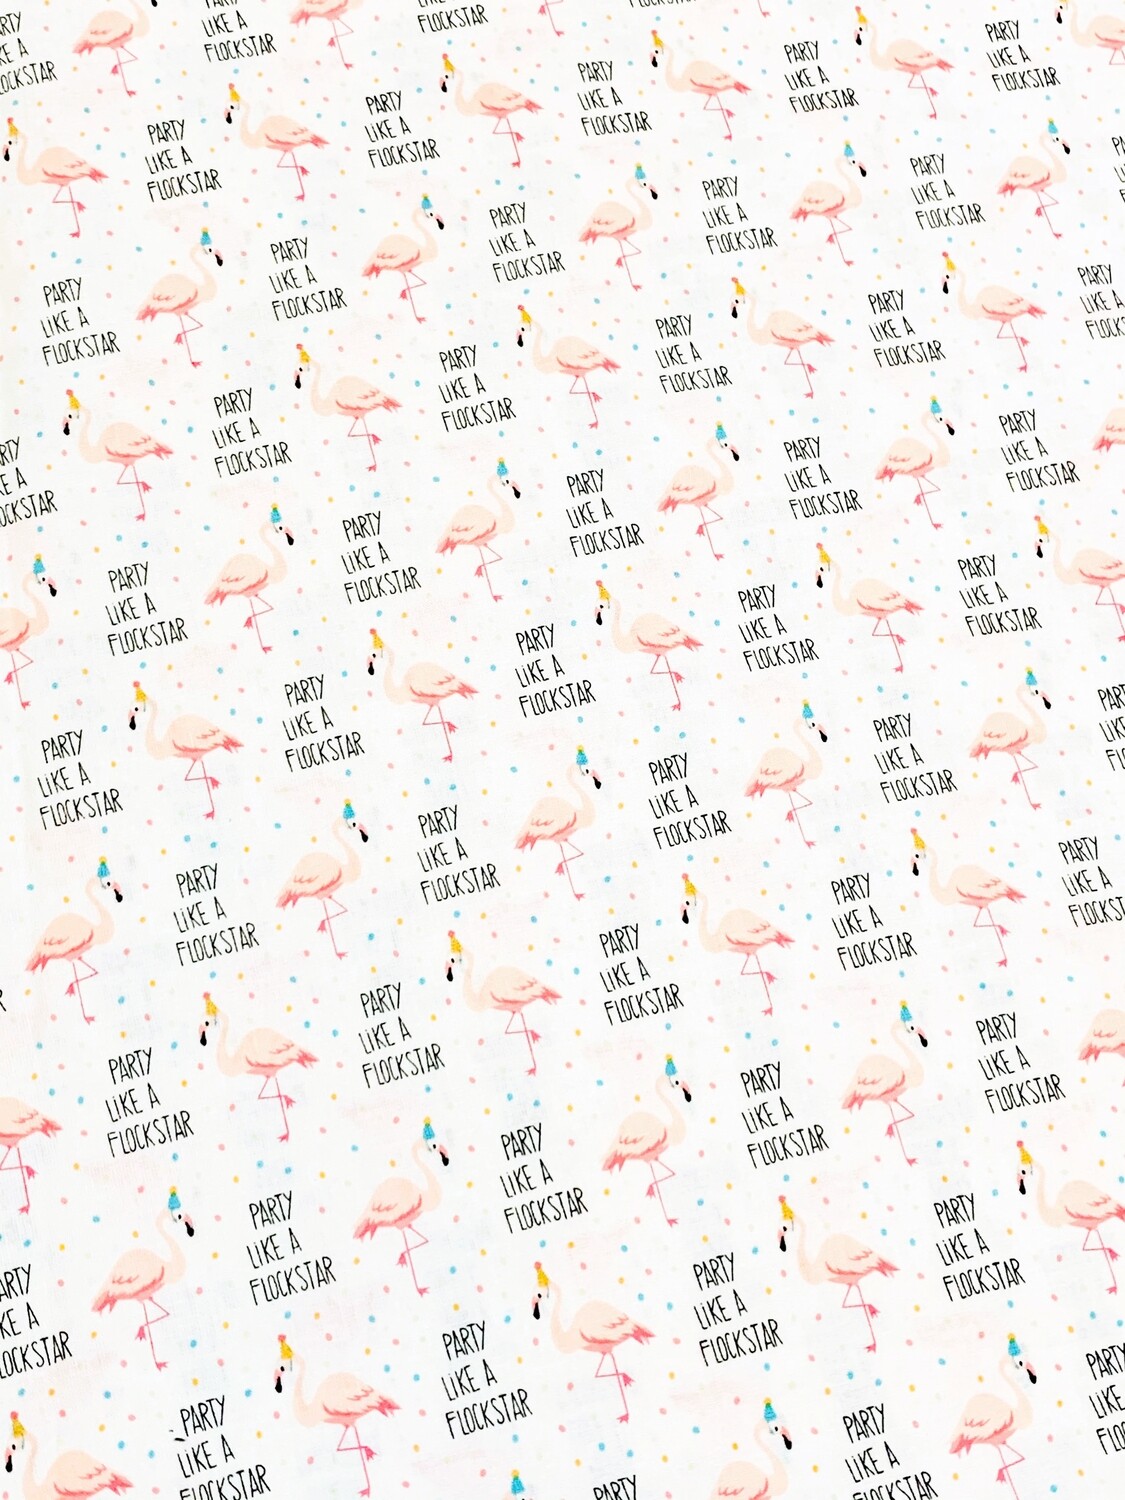 Party Like a Flockstar | Quilting Cotton | 112cm wide